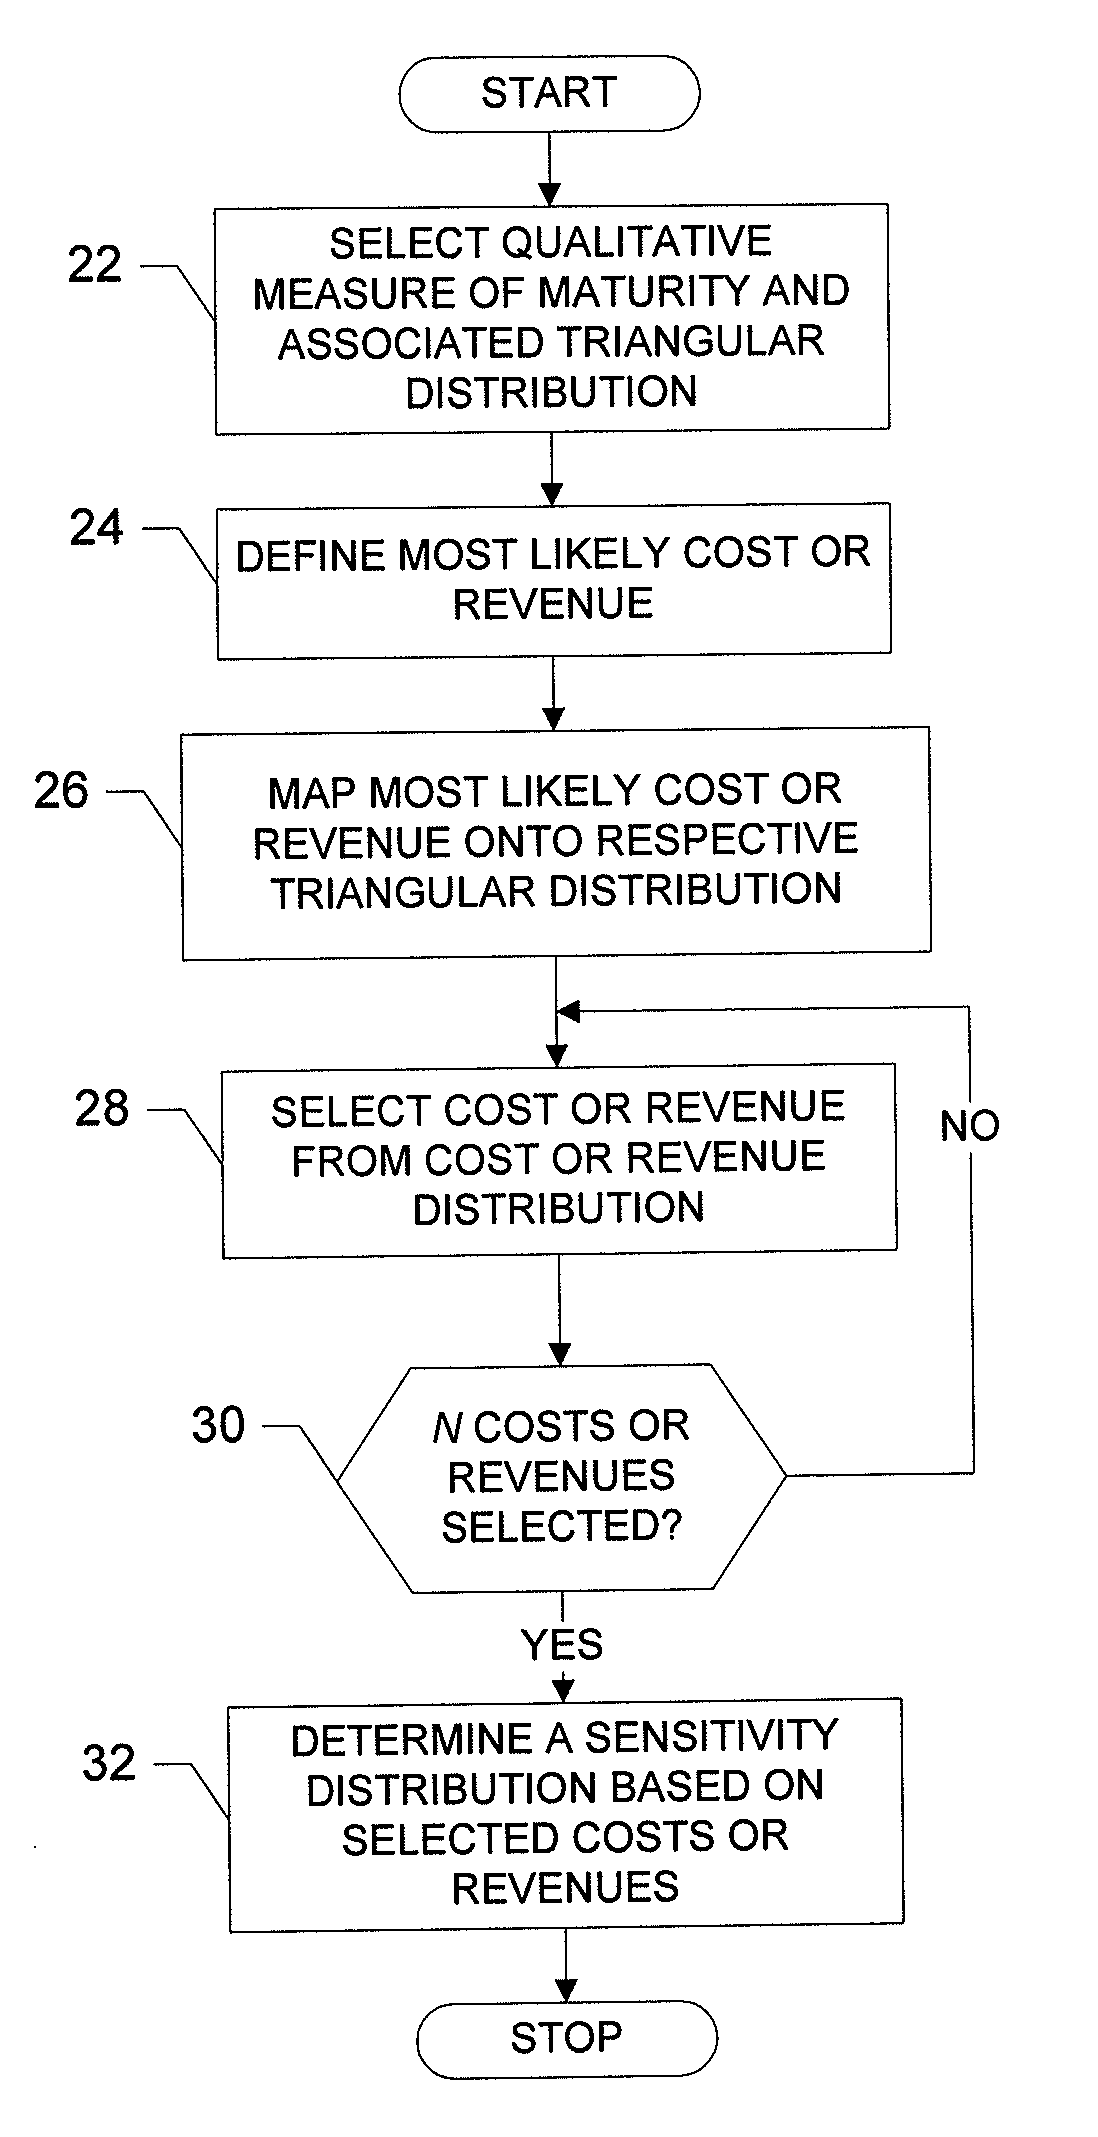 Systems, methods and computer program products for modeling a monetary measure for a good based upon technology maturity levels